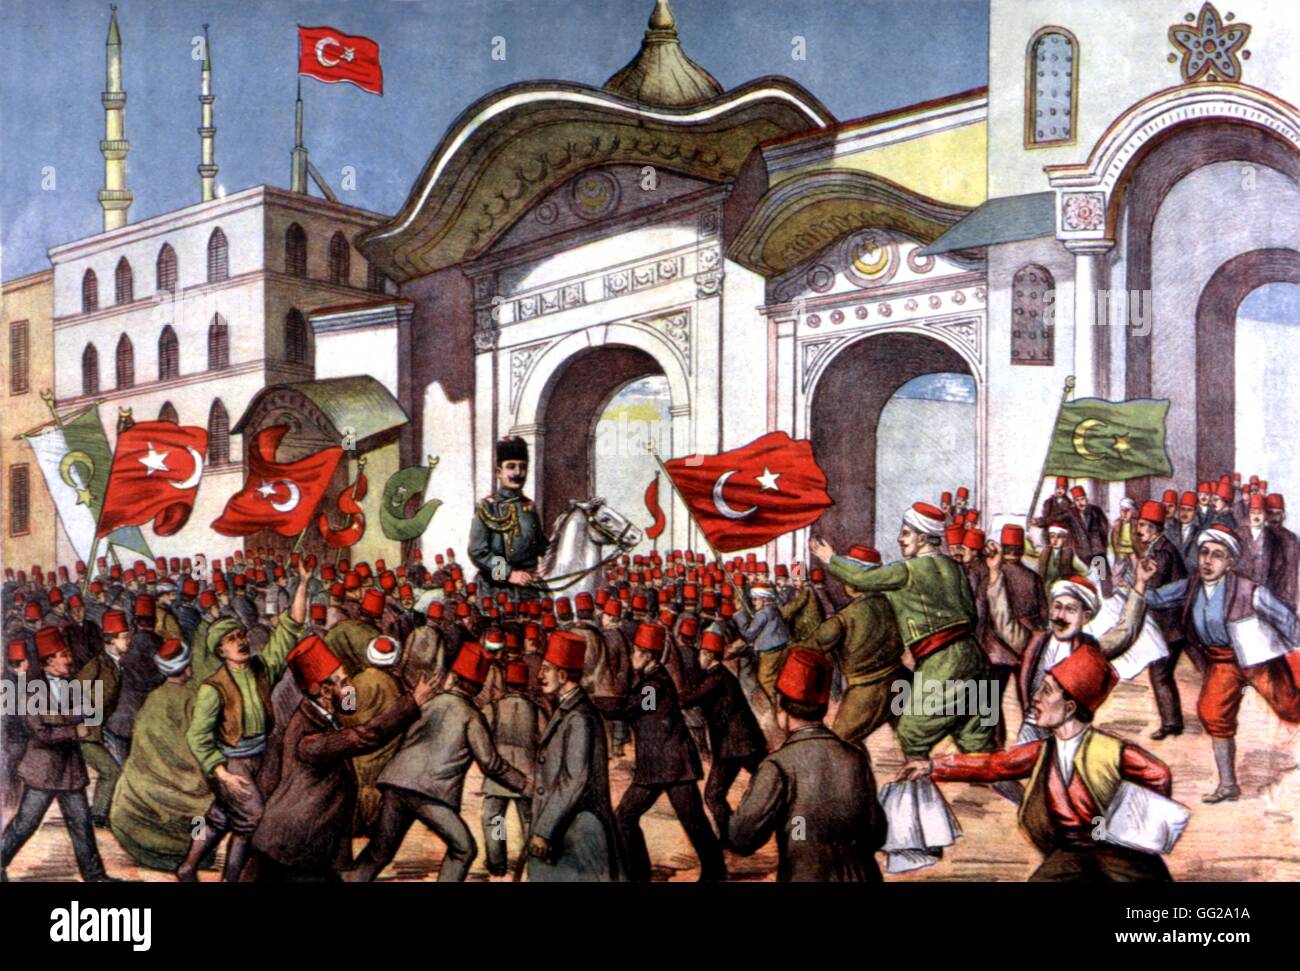 Turkish popular print. Ever Bey and the people heading towards the Sublime Porte (or Sublime Gate), at the time of Kamel Pacha's change 1913 Turkey Washington, Library of Congress Stock Photo